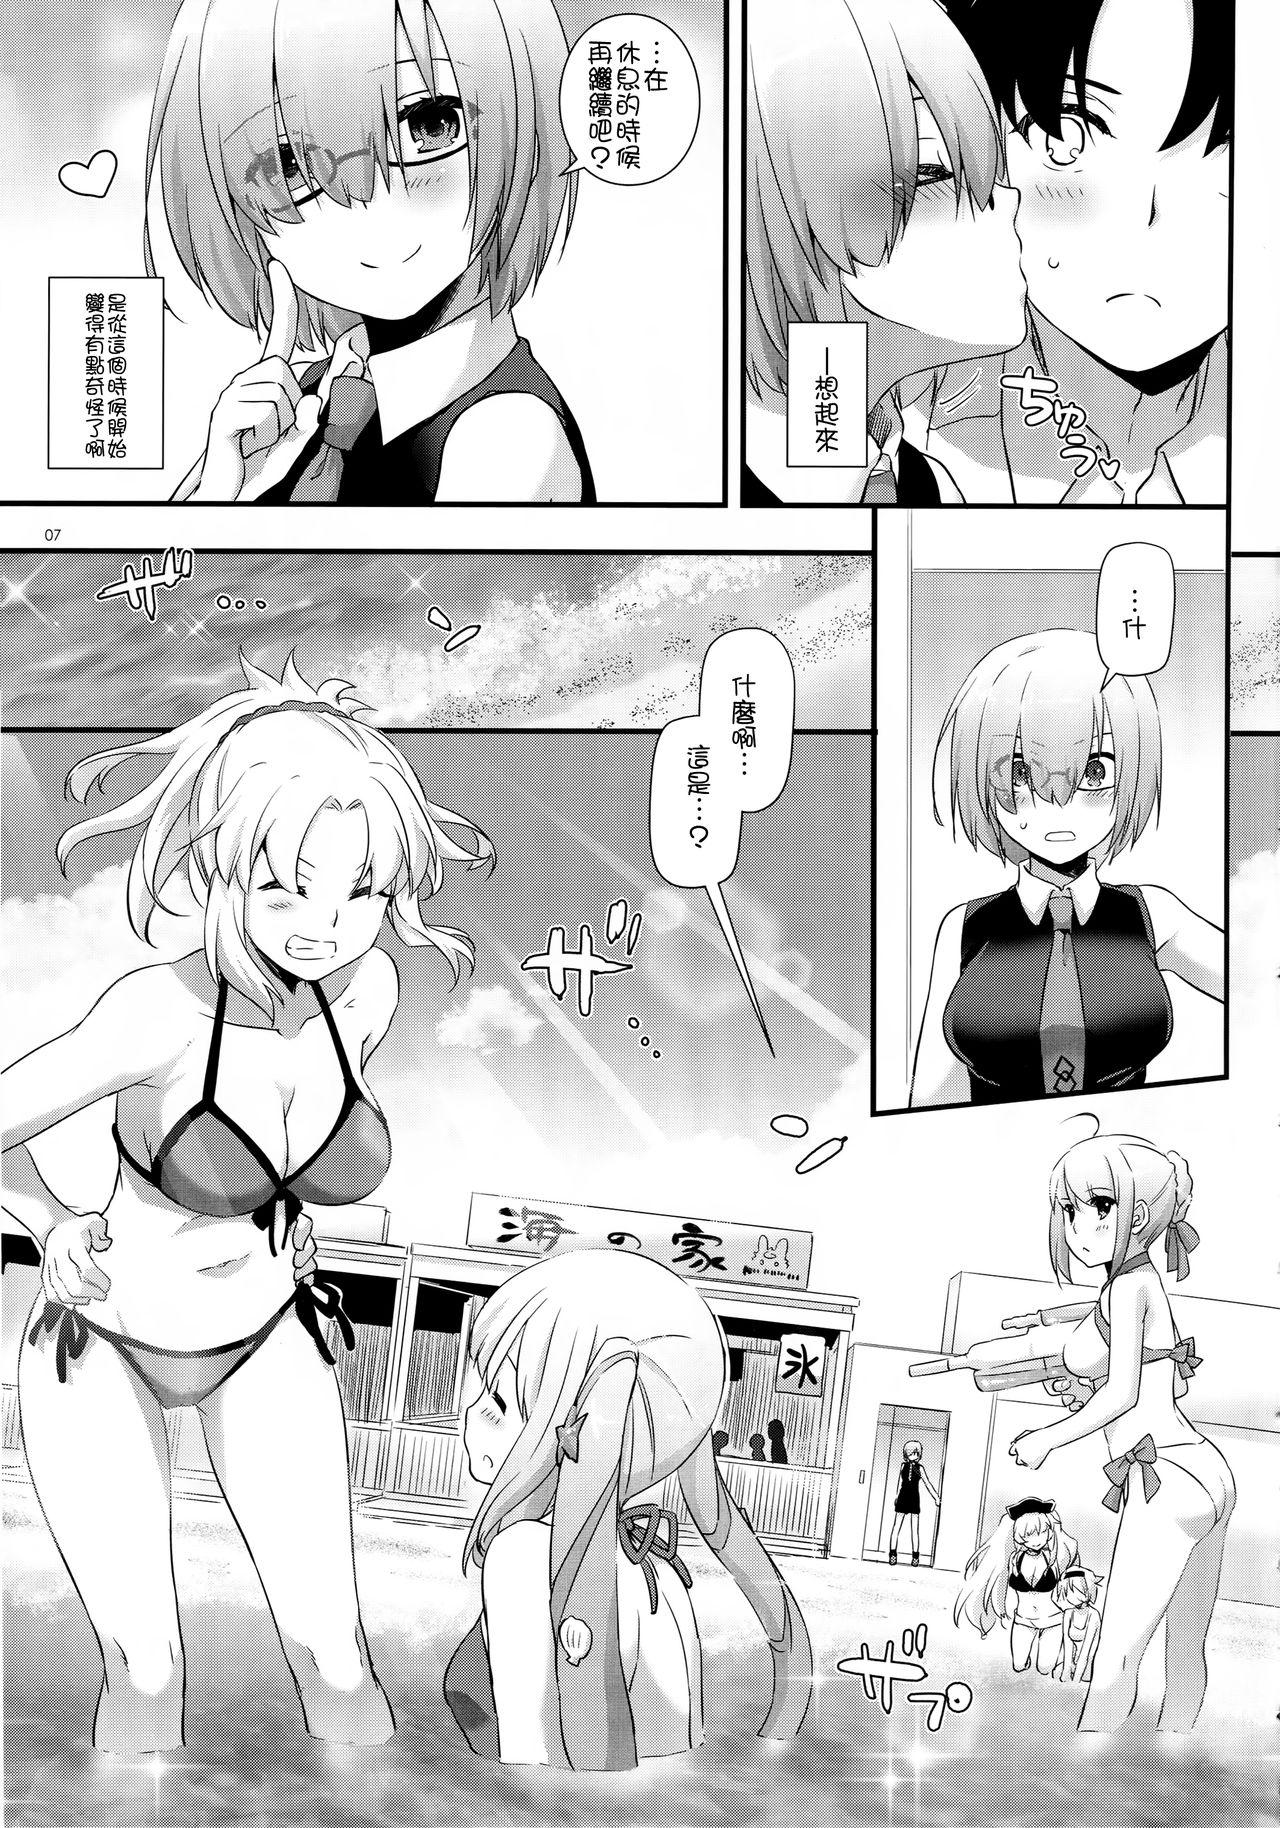 8teenxxx D.L. action 116 - Fate grand order Hooker - Page 7